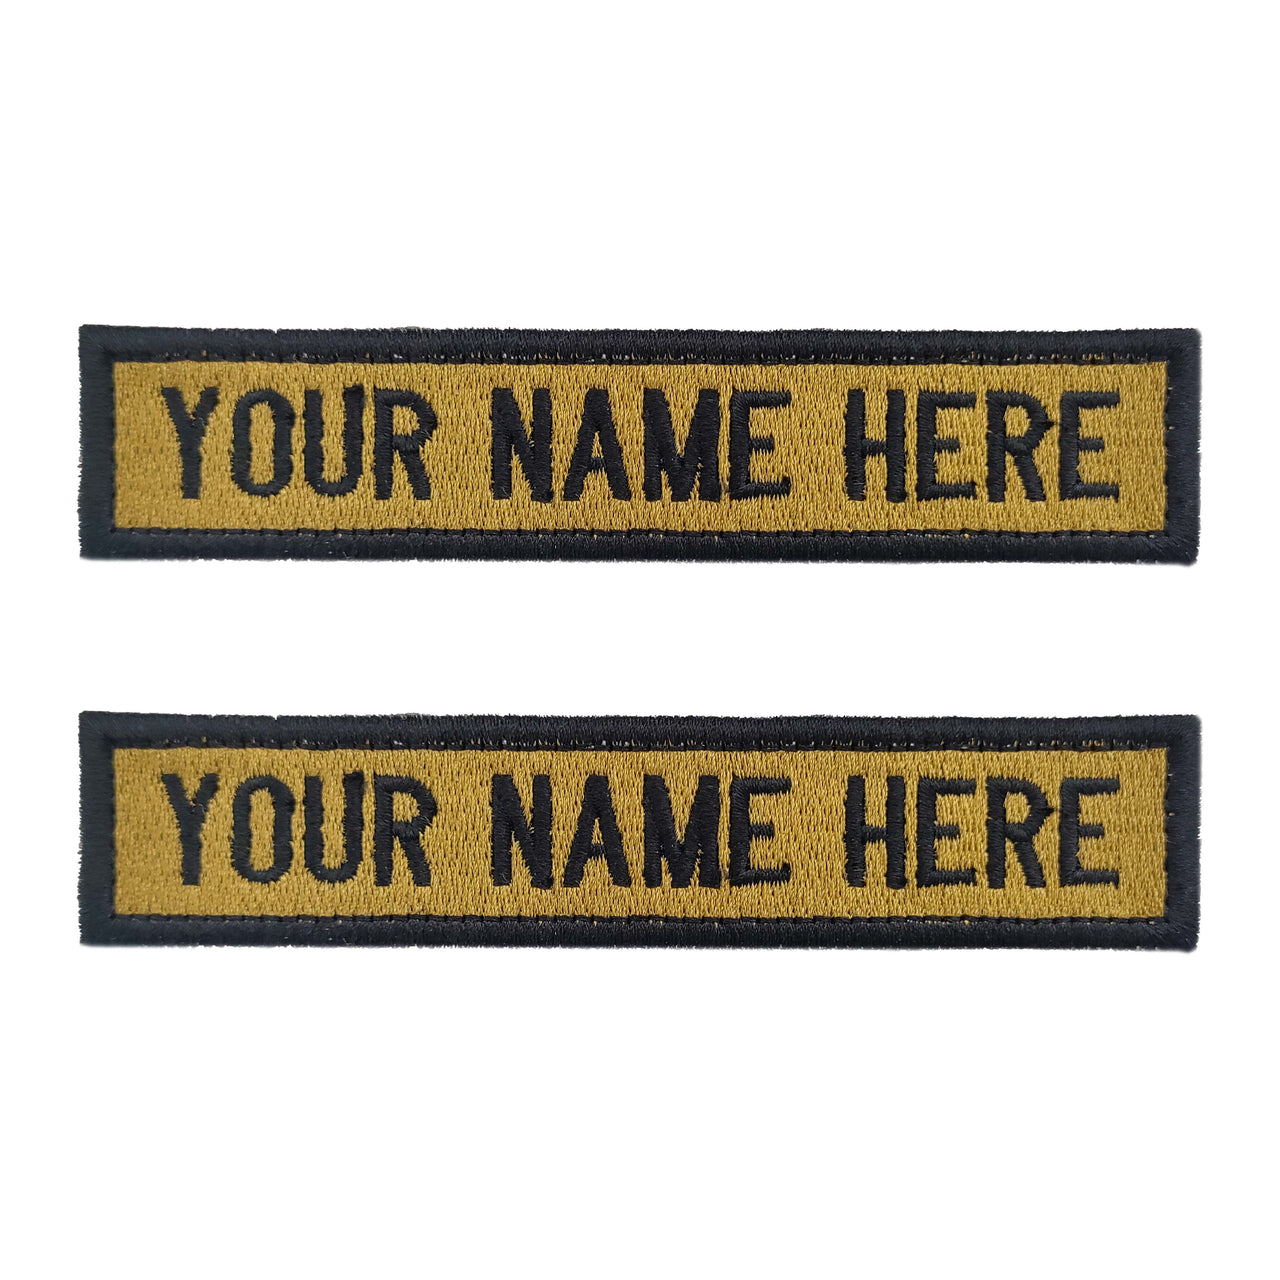 Embroidered Police Name Tab (Khaki Background & Black Letters) - Set of 2